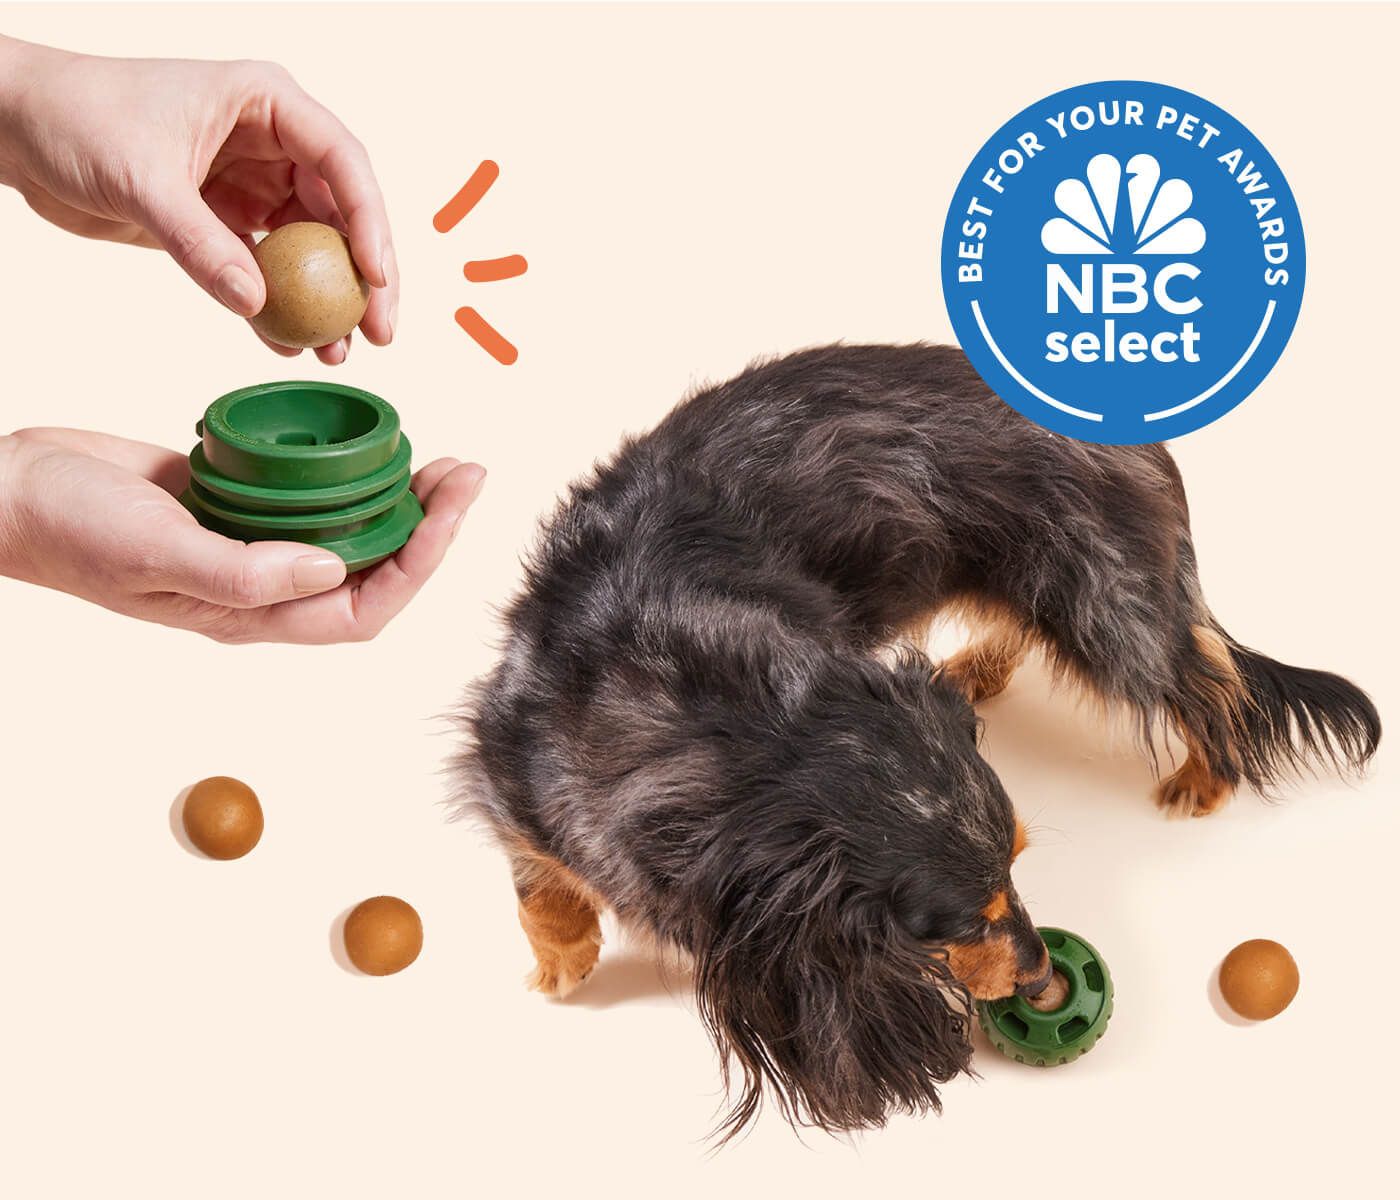 dachshund licking a pupsicle with pops surrounding the dog. A hand placing a pop in the pupsicle, with NBC Select badge